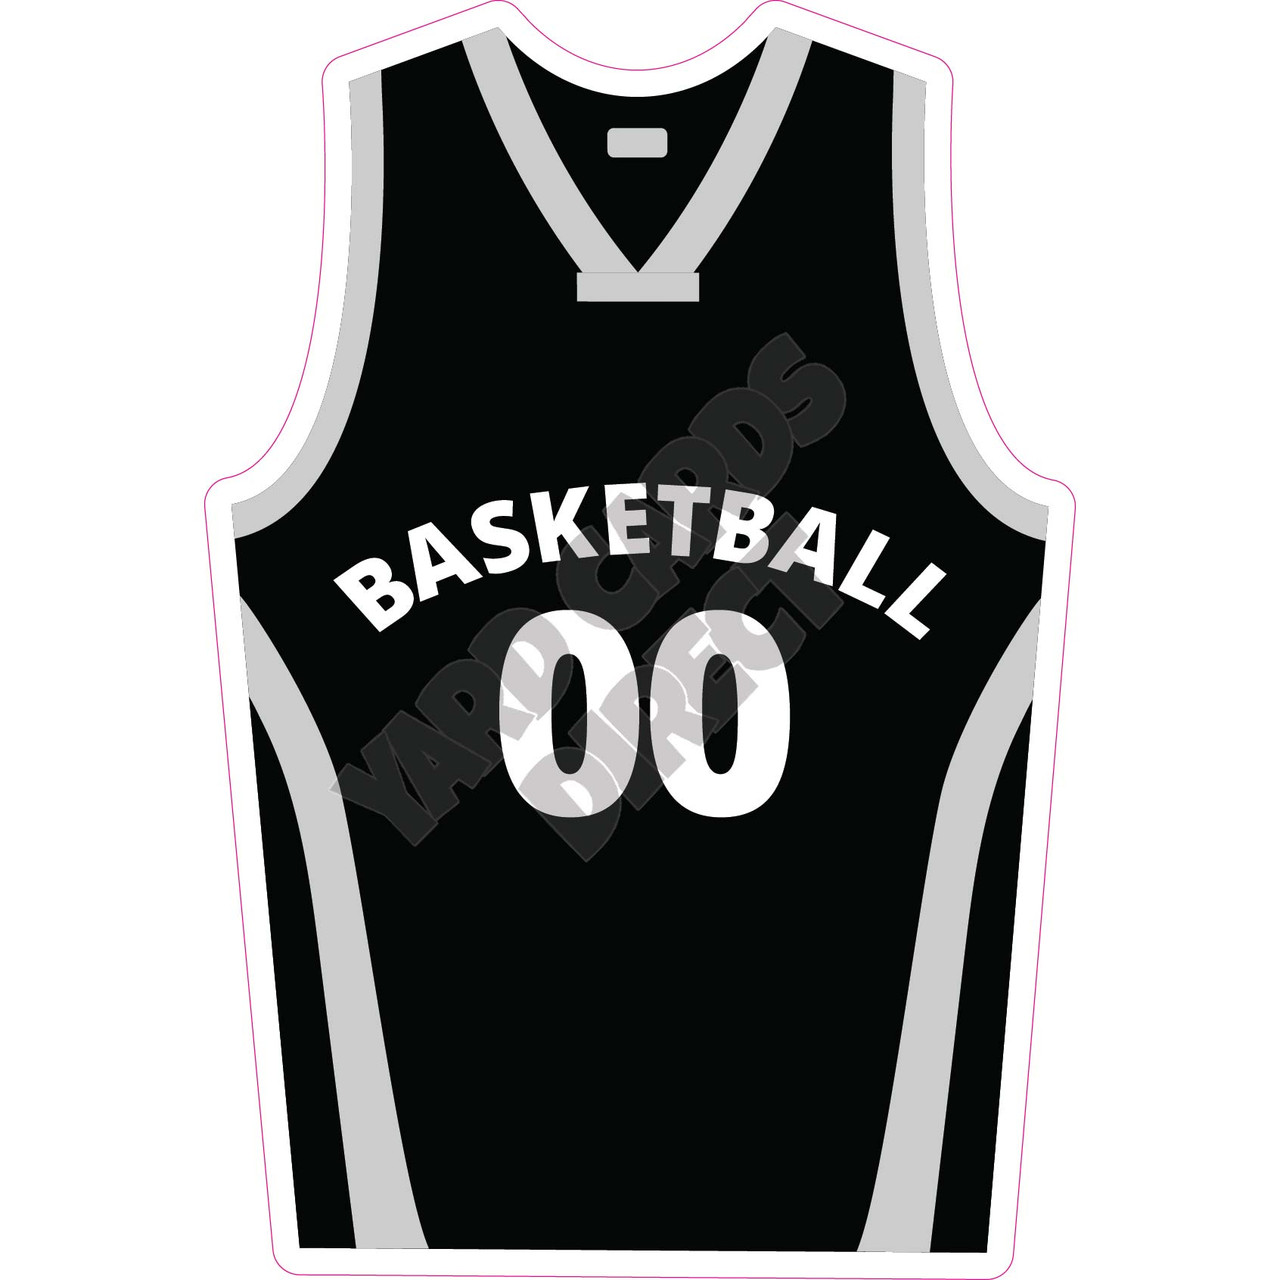 Latest Basketball Jersey Design - Buy Latest Basketball Jersey  -  Cliparts.co